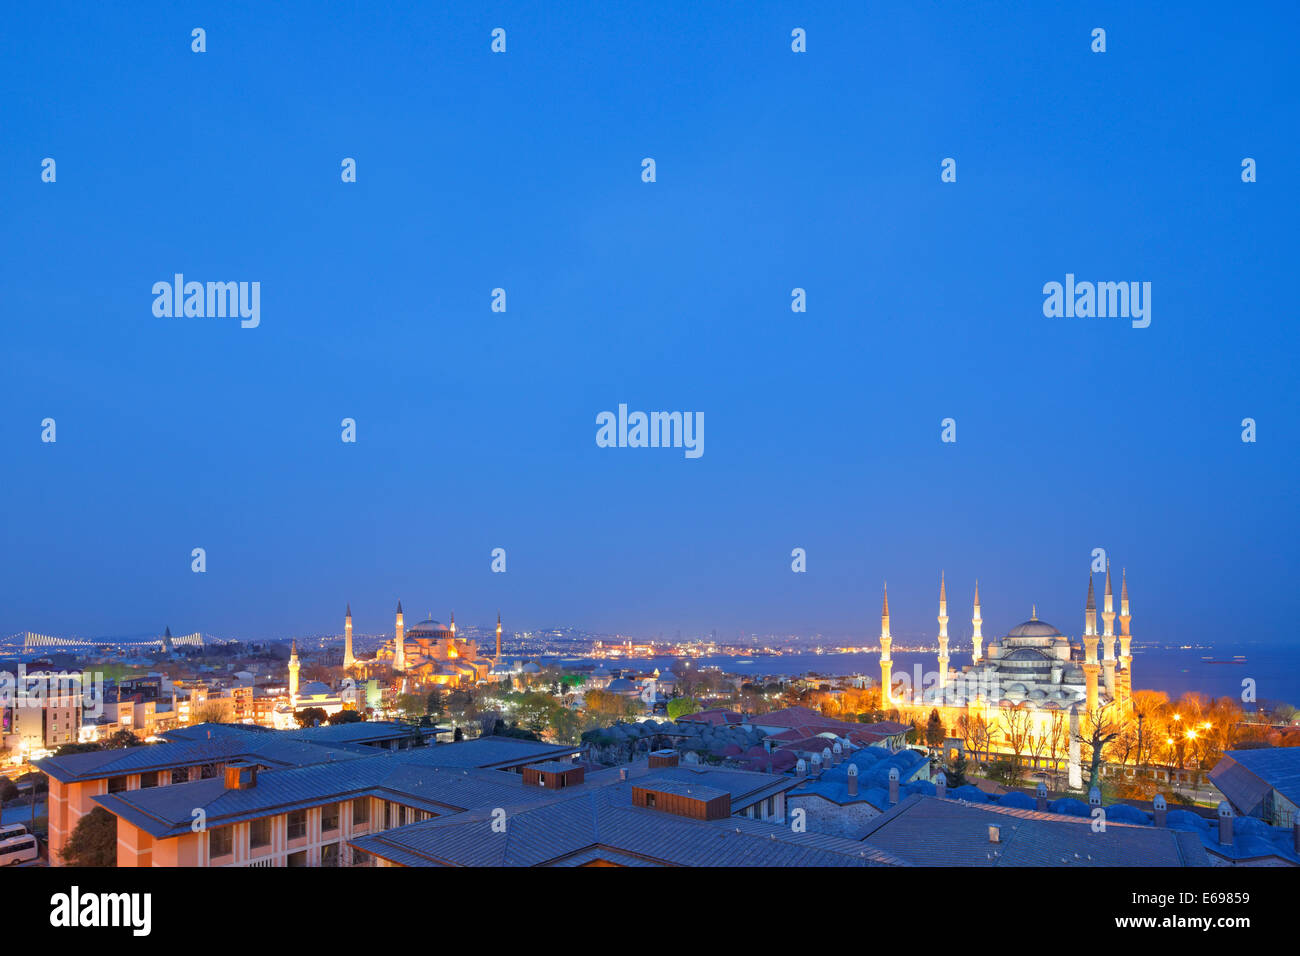 City panorama with the Hagia Sophia and the Blue Mosque, Sultan Ahmed Mosque, Sultanahmet, Istanbul, European side, Turkey Stock Photo